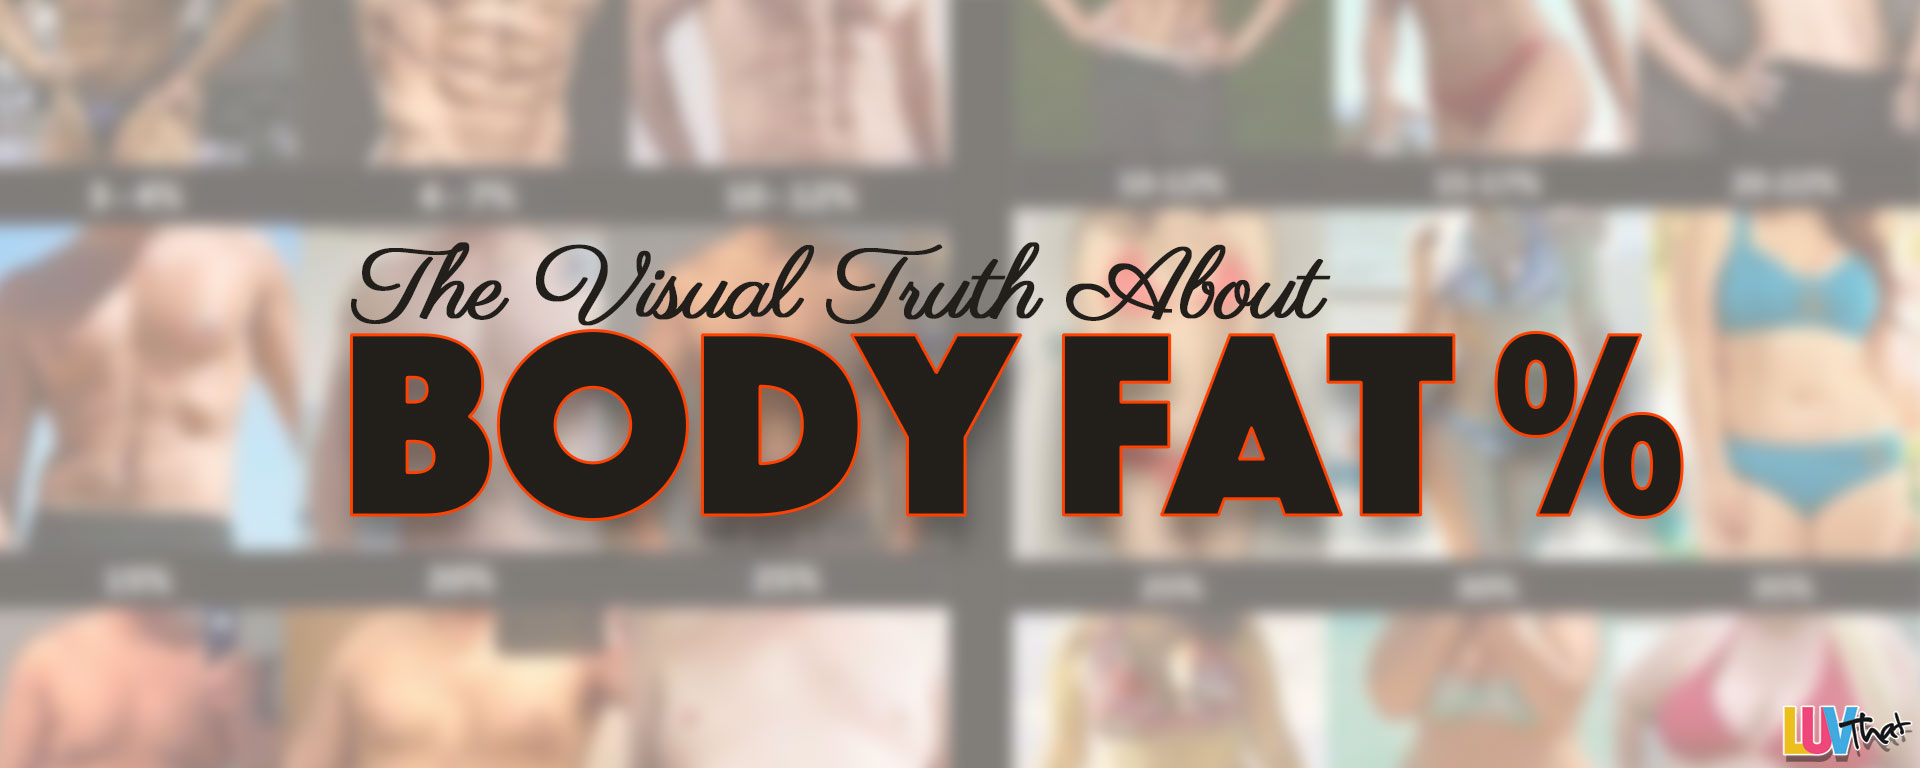 featured body fat visual truth